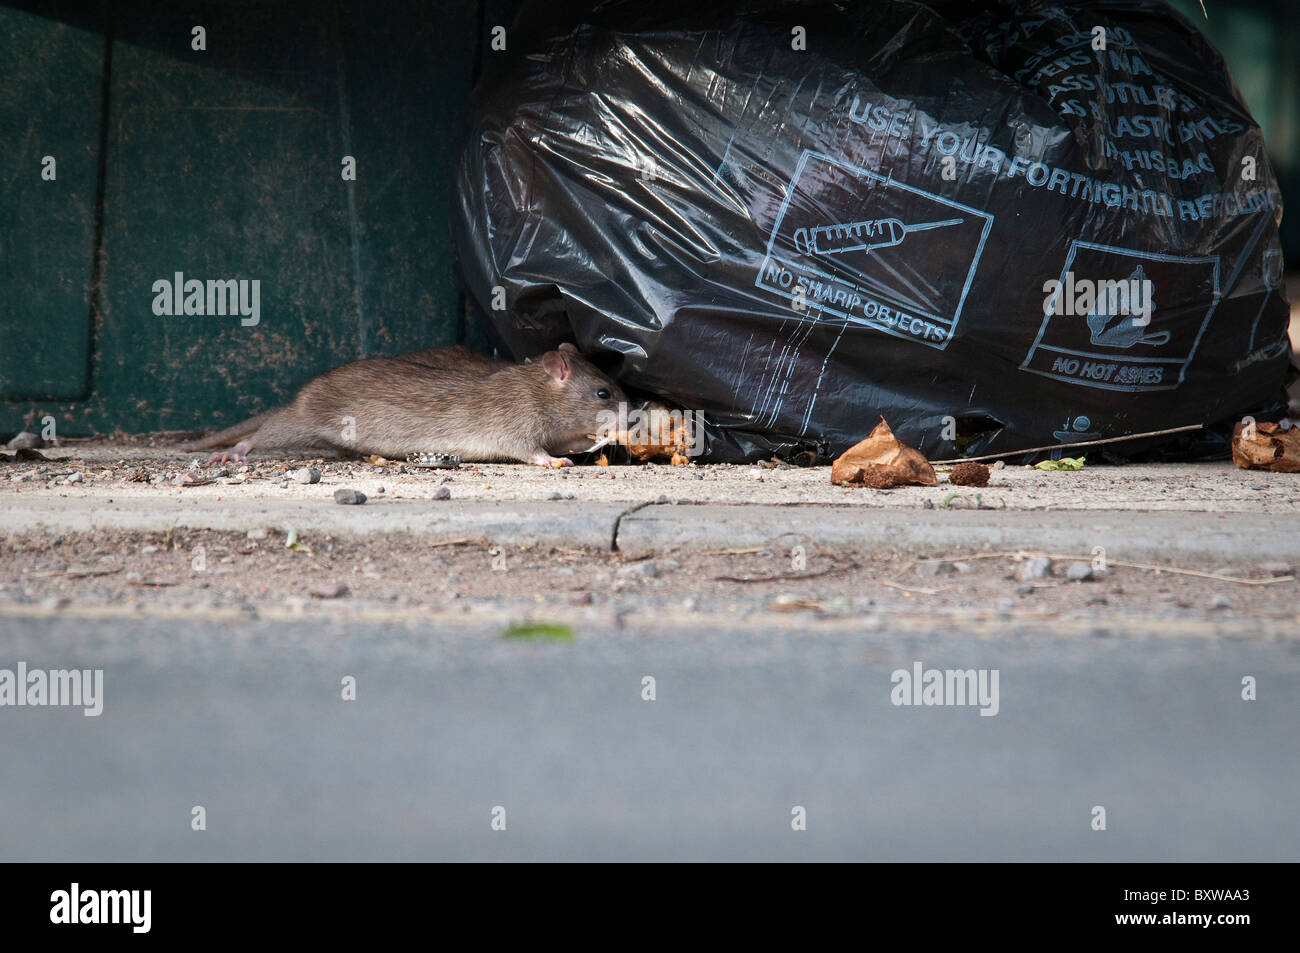 Rats eating food waste from garbage bags in UK street Stock Photo